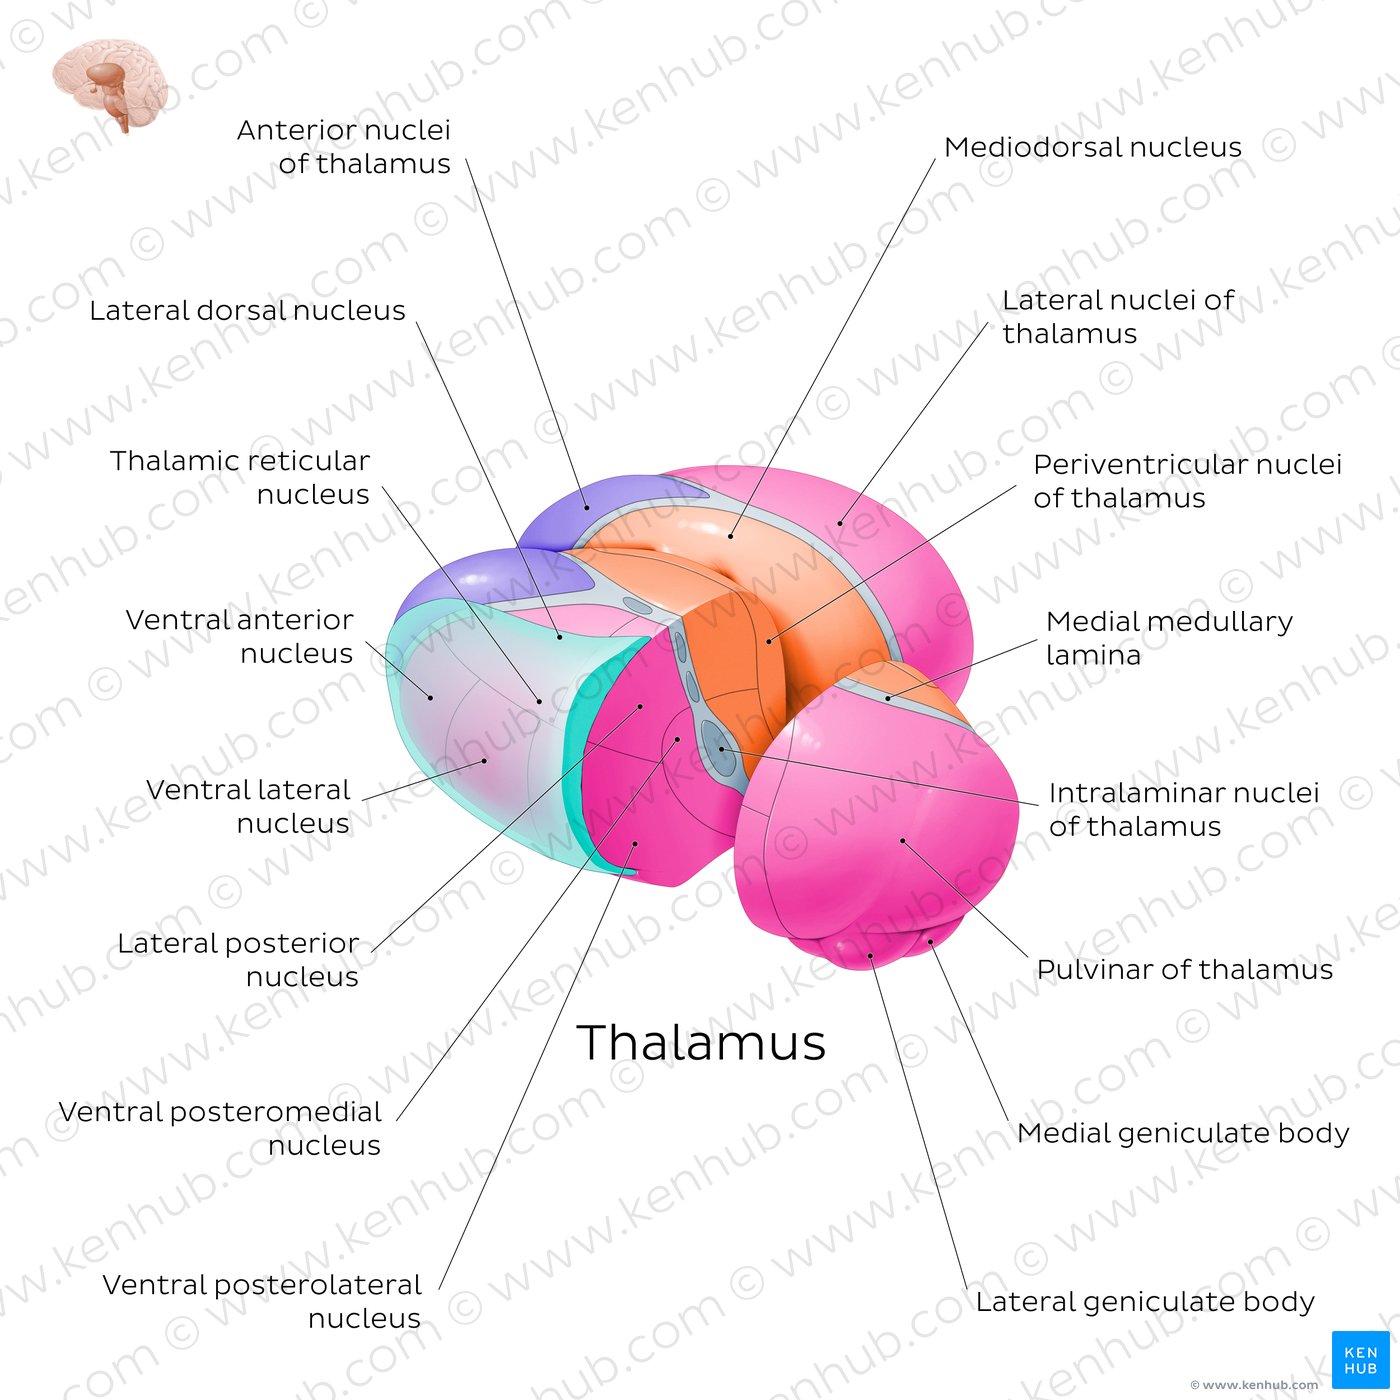 Thalamic nuclei: Overview